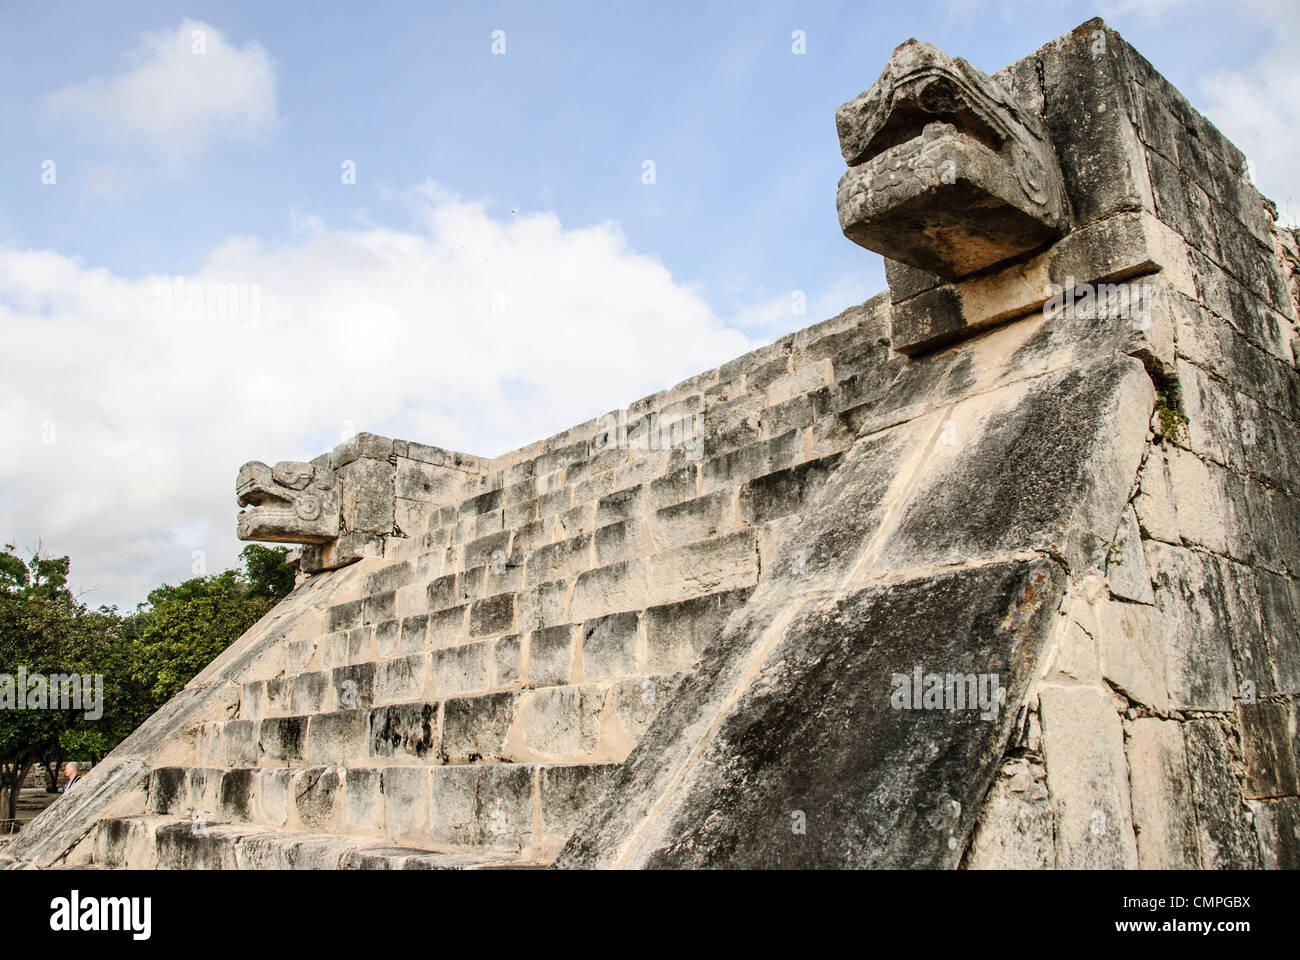 CHICHEN ITZA, Mexico - Stone stairs at Chichen Itza with jaguar heads on either side. The Jaguar is a recurring symbol in Mayan culture. Stock Photo